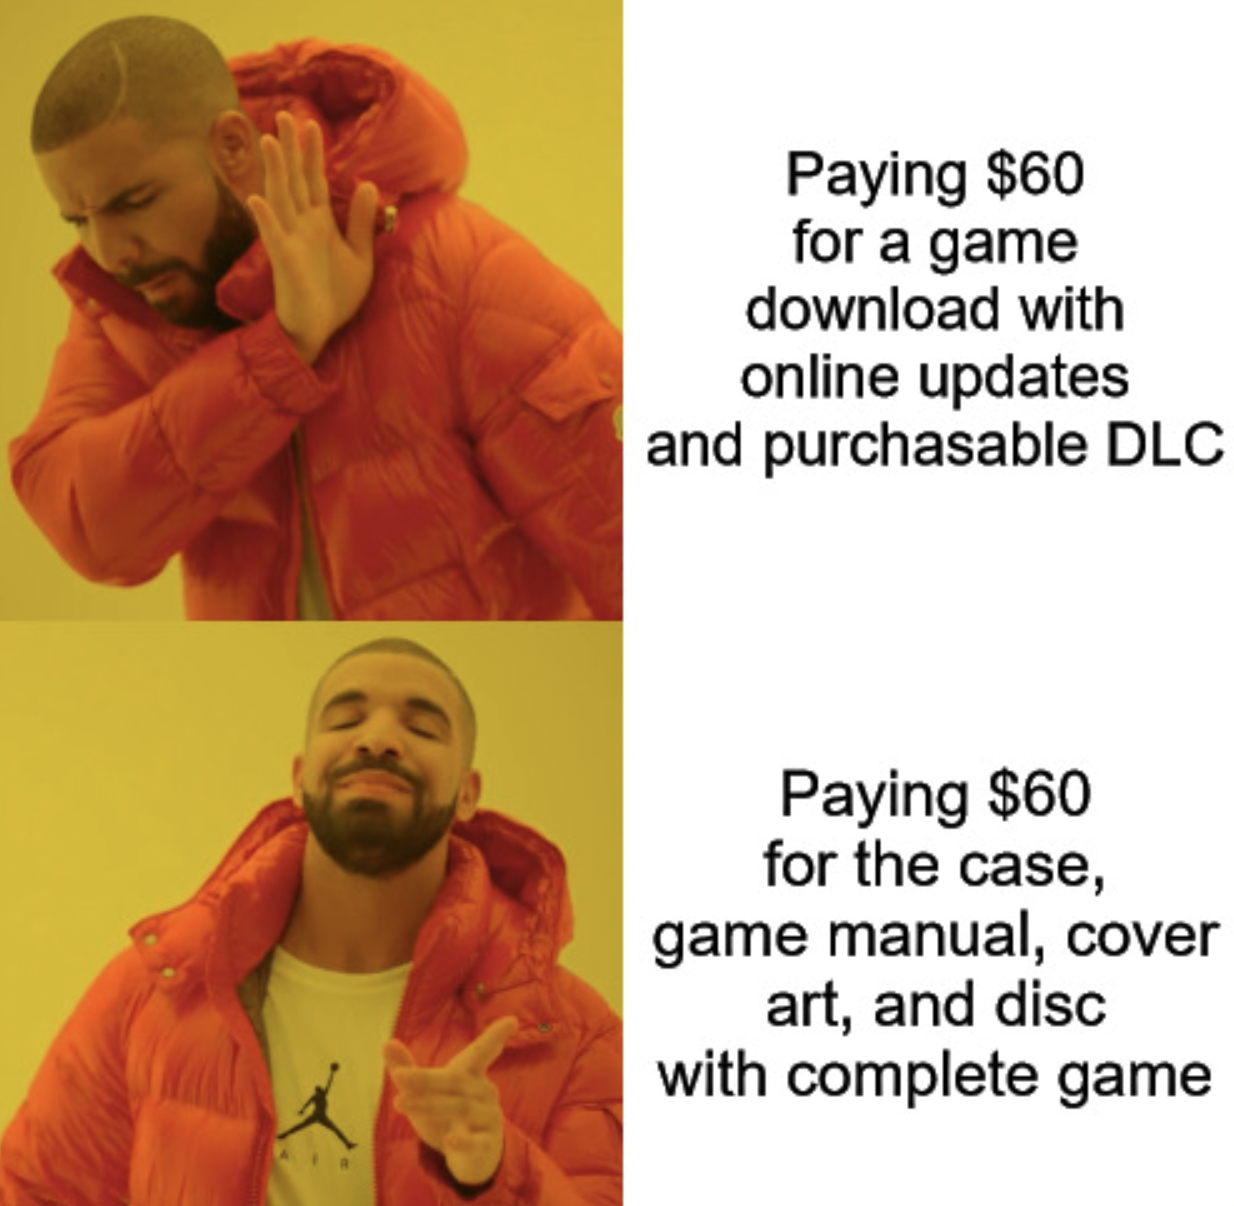 Gaming memes - payment icon - Paying $60 for a game download with online updates and purchasable Dlc Paying $60 for the case, game manual, cover art, and disc with complete game